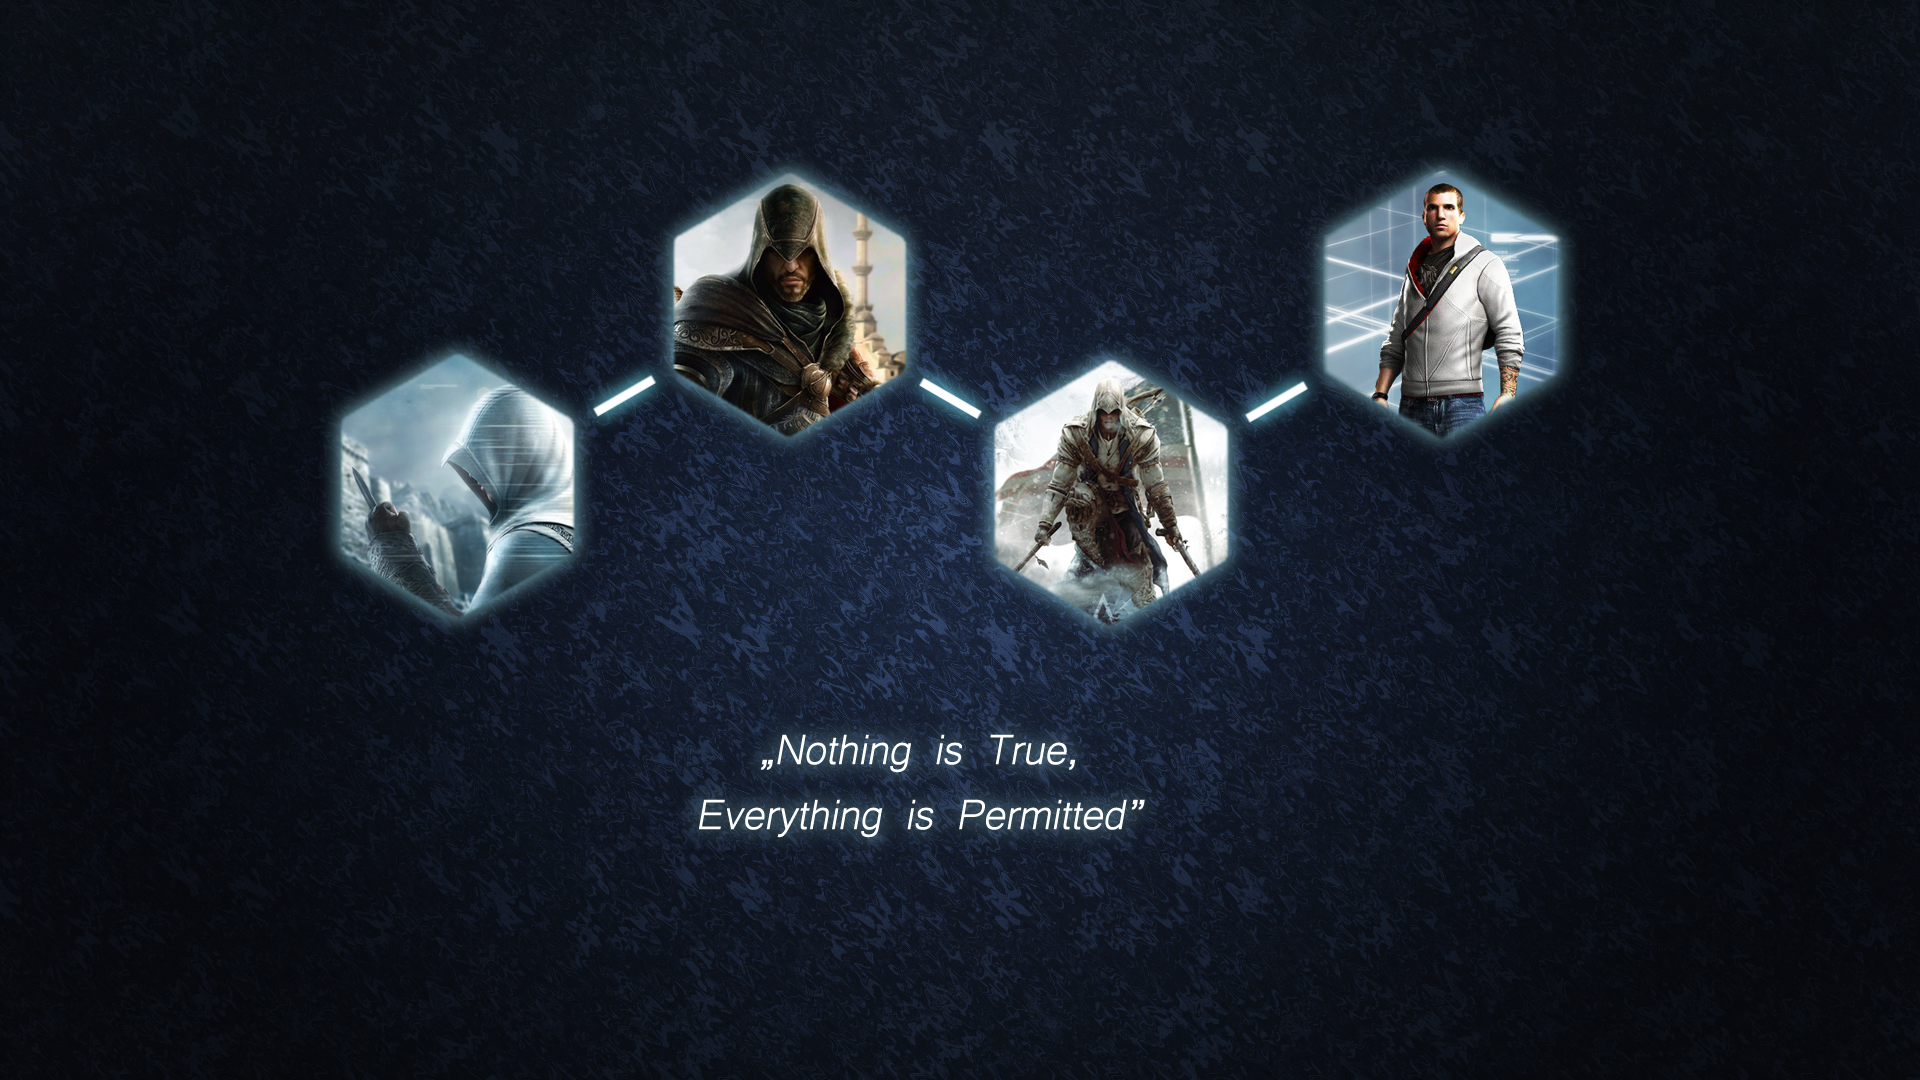 Кредо ассасина слова. Nothing is true everything is permitted обои на рабочий стол. Nothing is true everything is permitted тату. Assassin's Creed Phone Wallpaper nothing is true. True everything